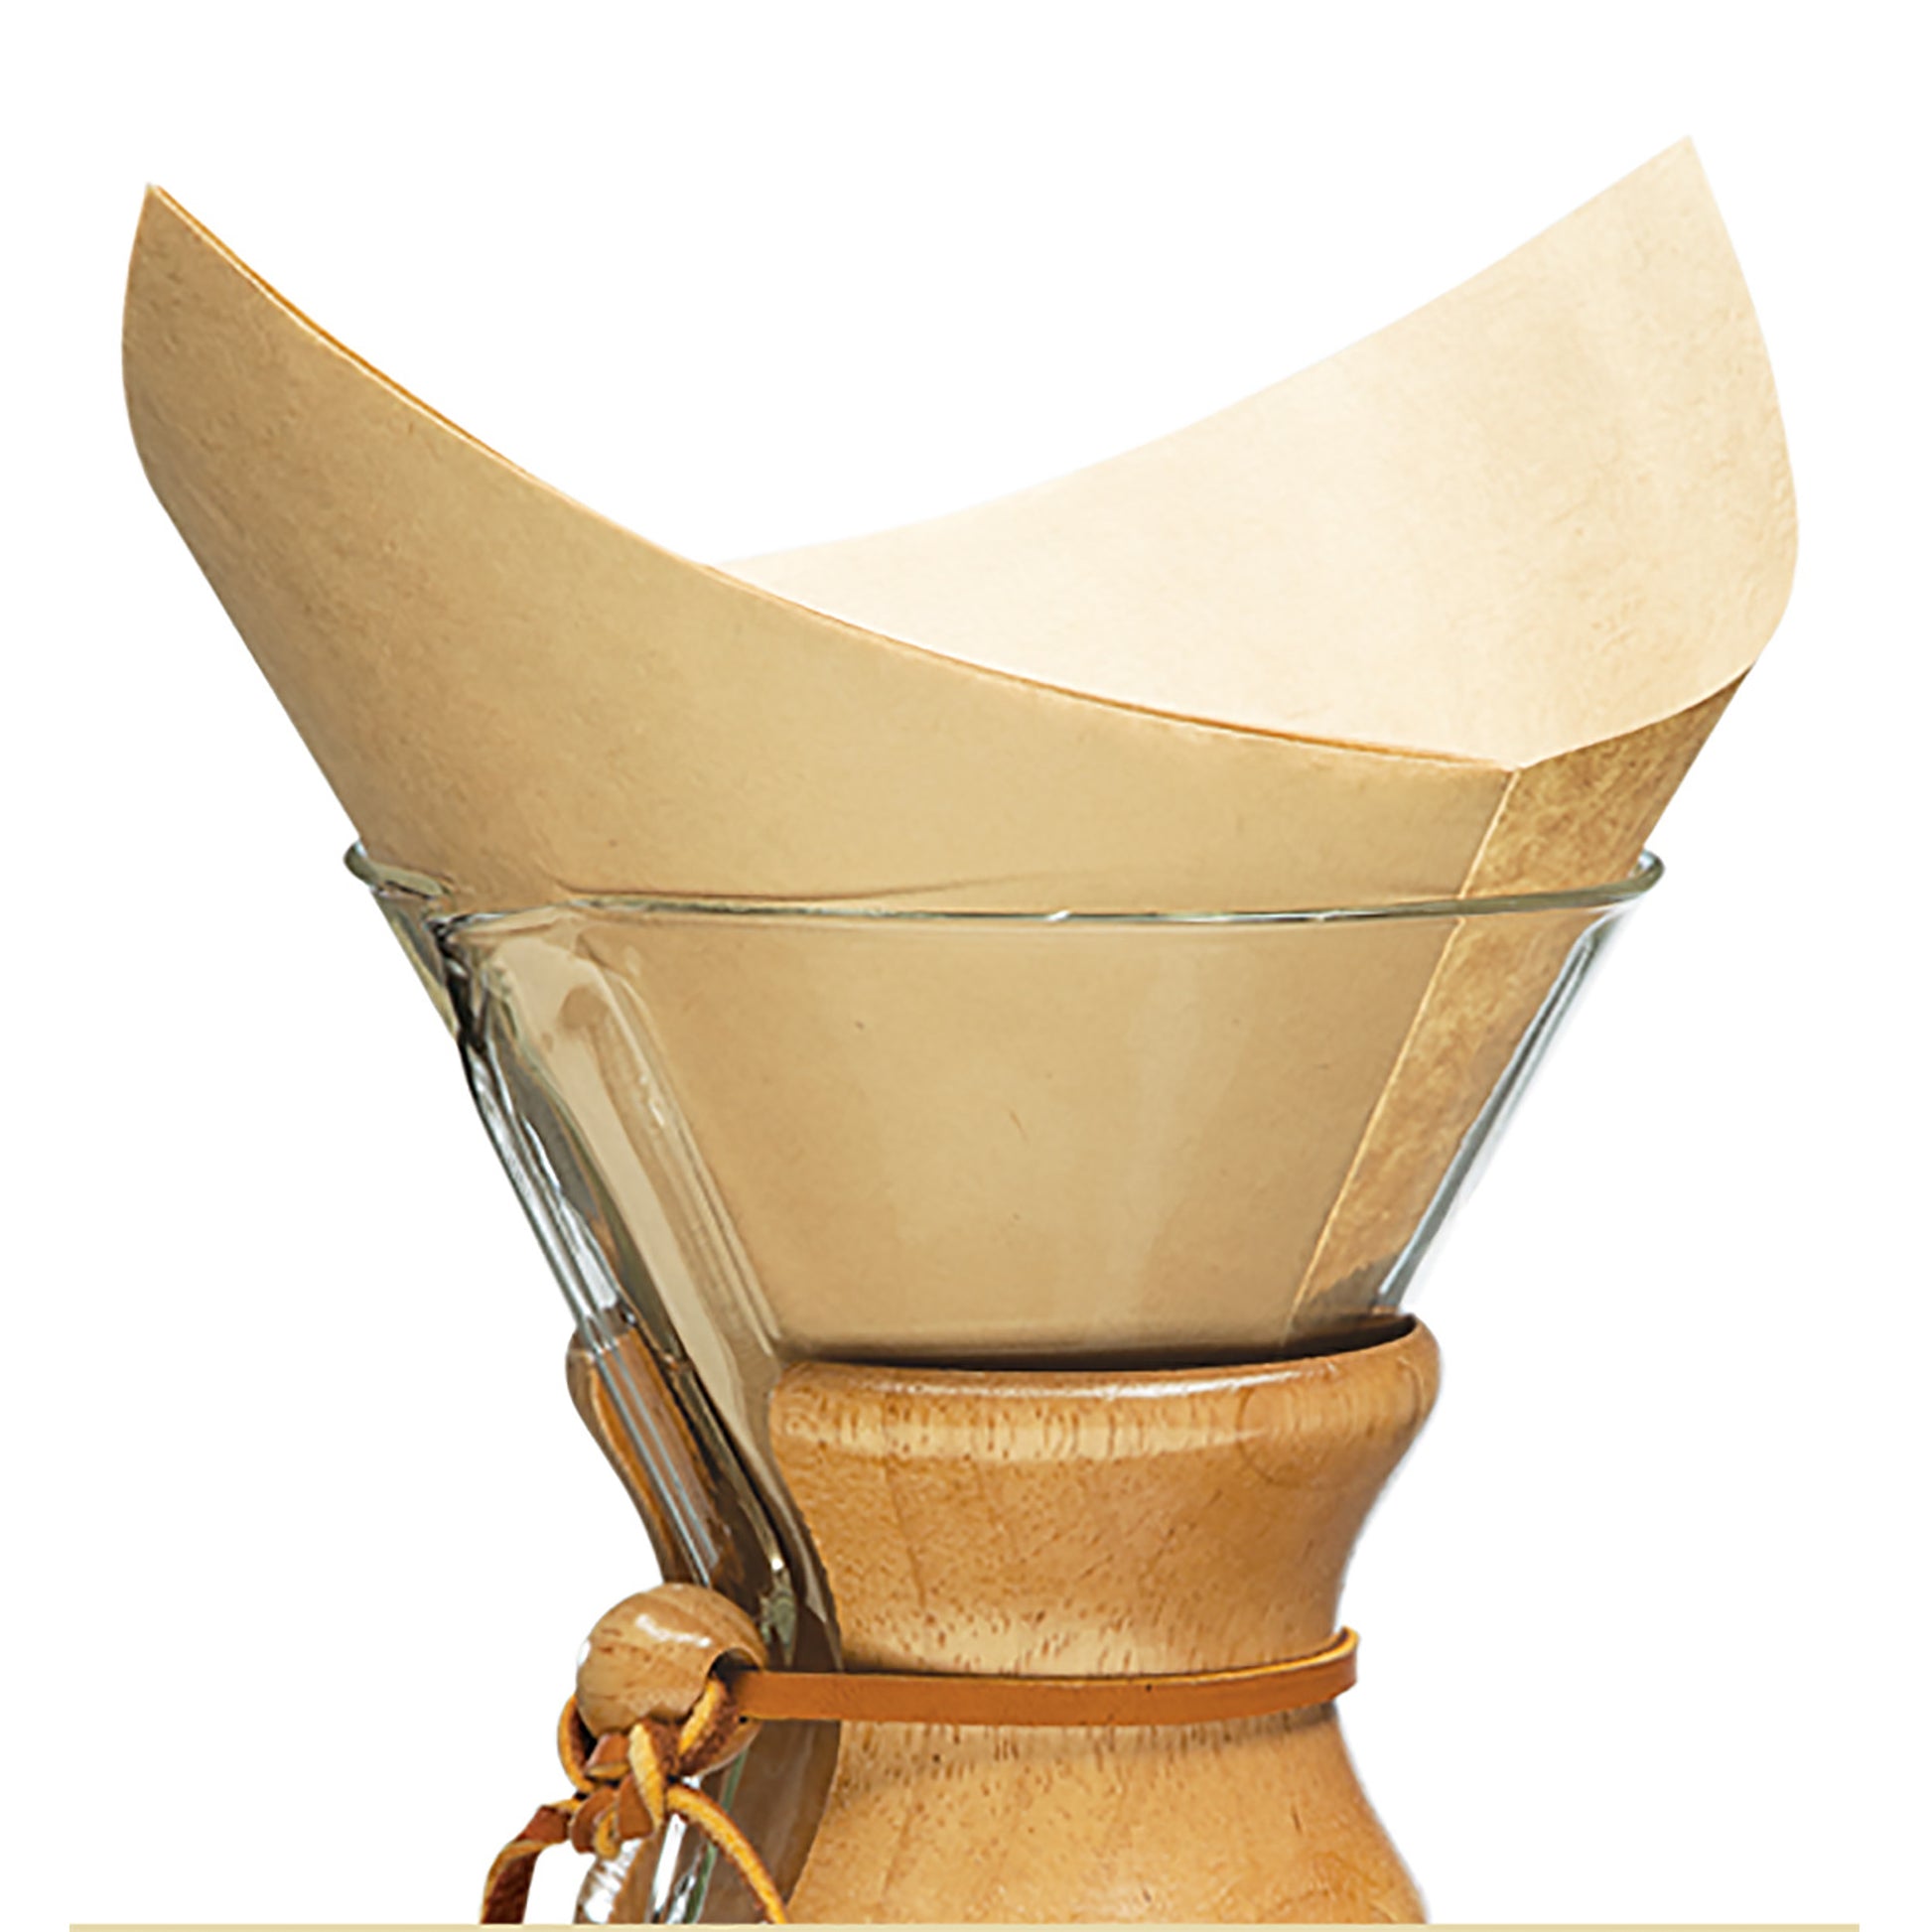 Chemex Unbleached Coffee Filters